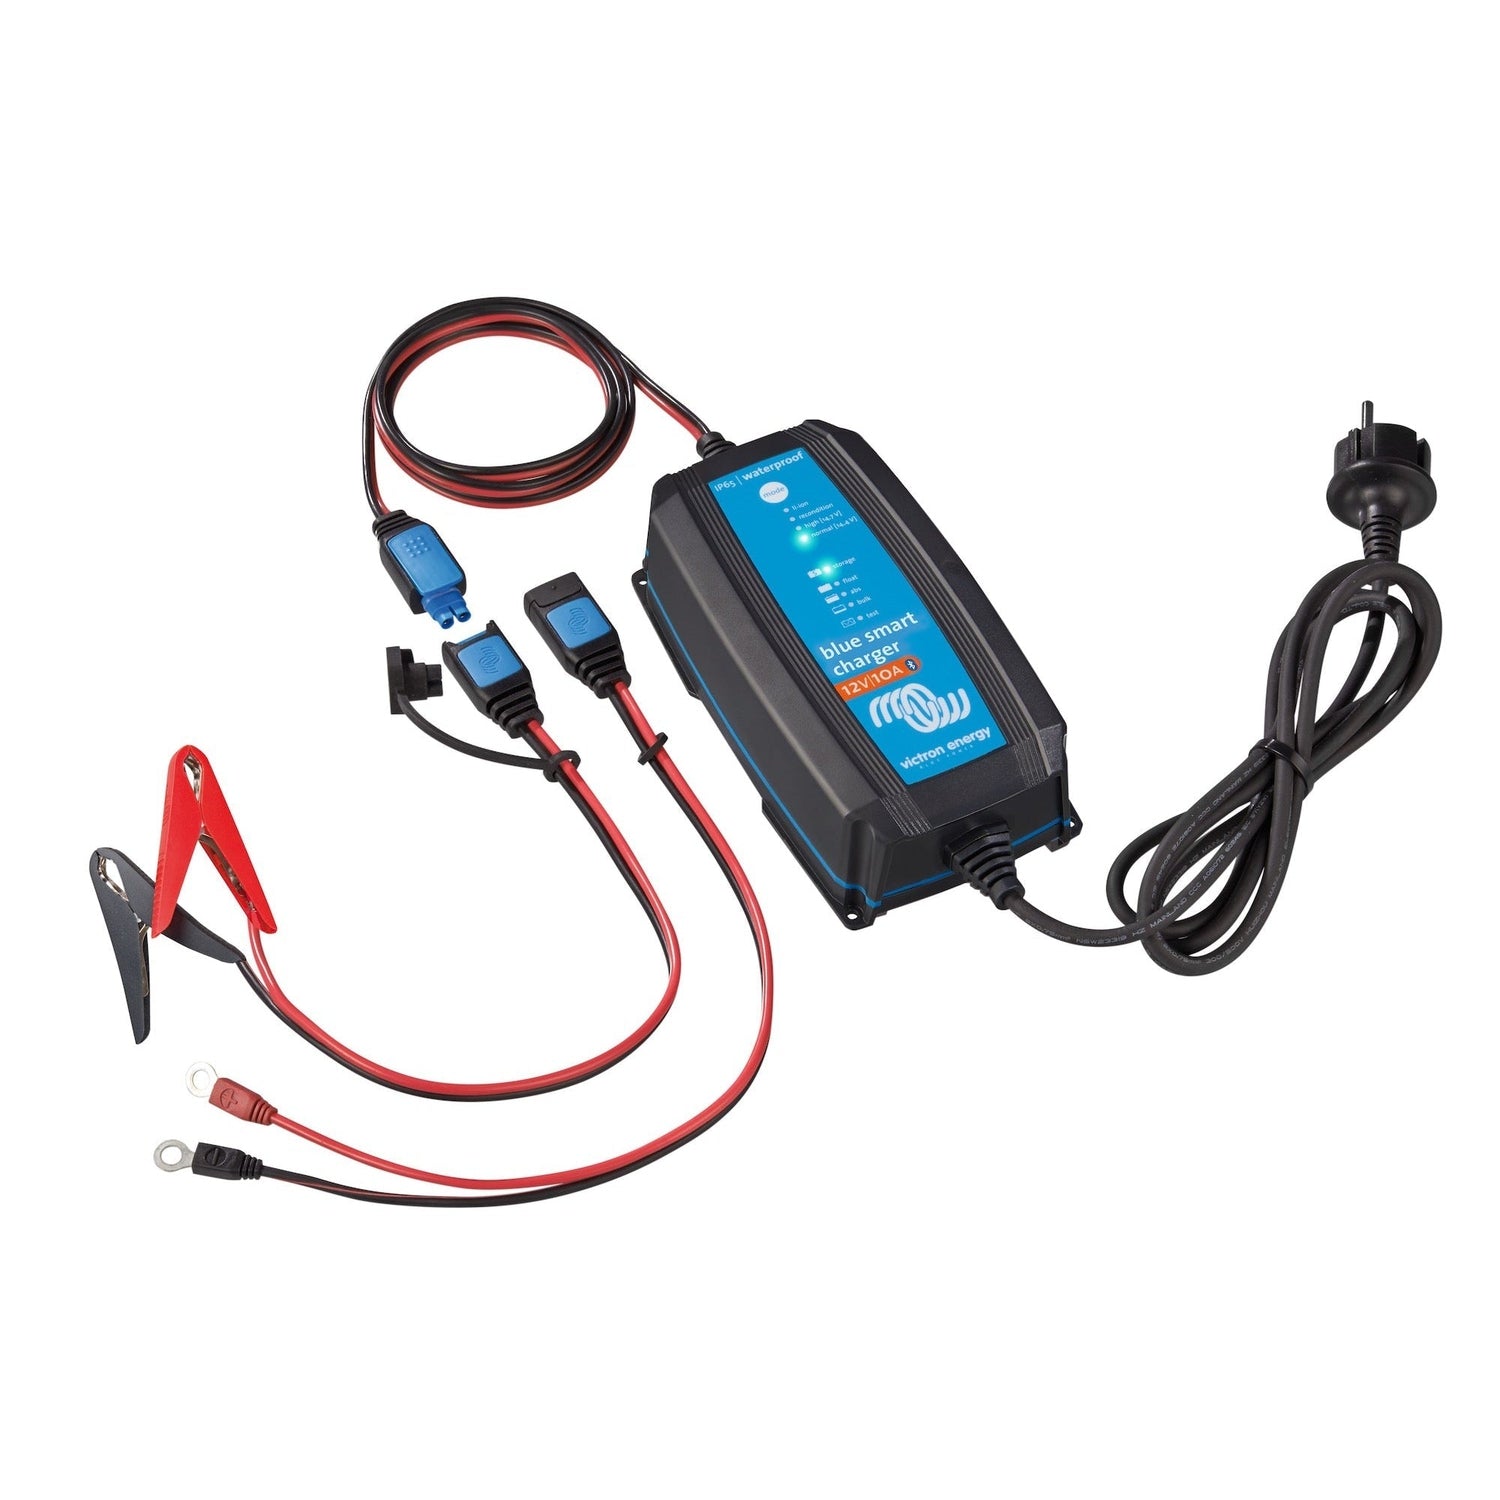 View of batteries_chargers Victron Blue Smart IP65 Marine Charger 12v/10A Bluetooth available at EZOKO Pike and Musky Shop